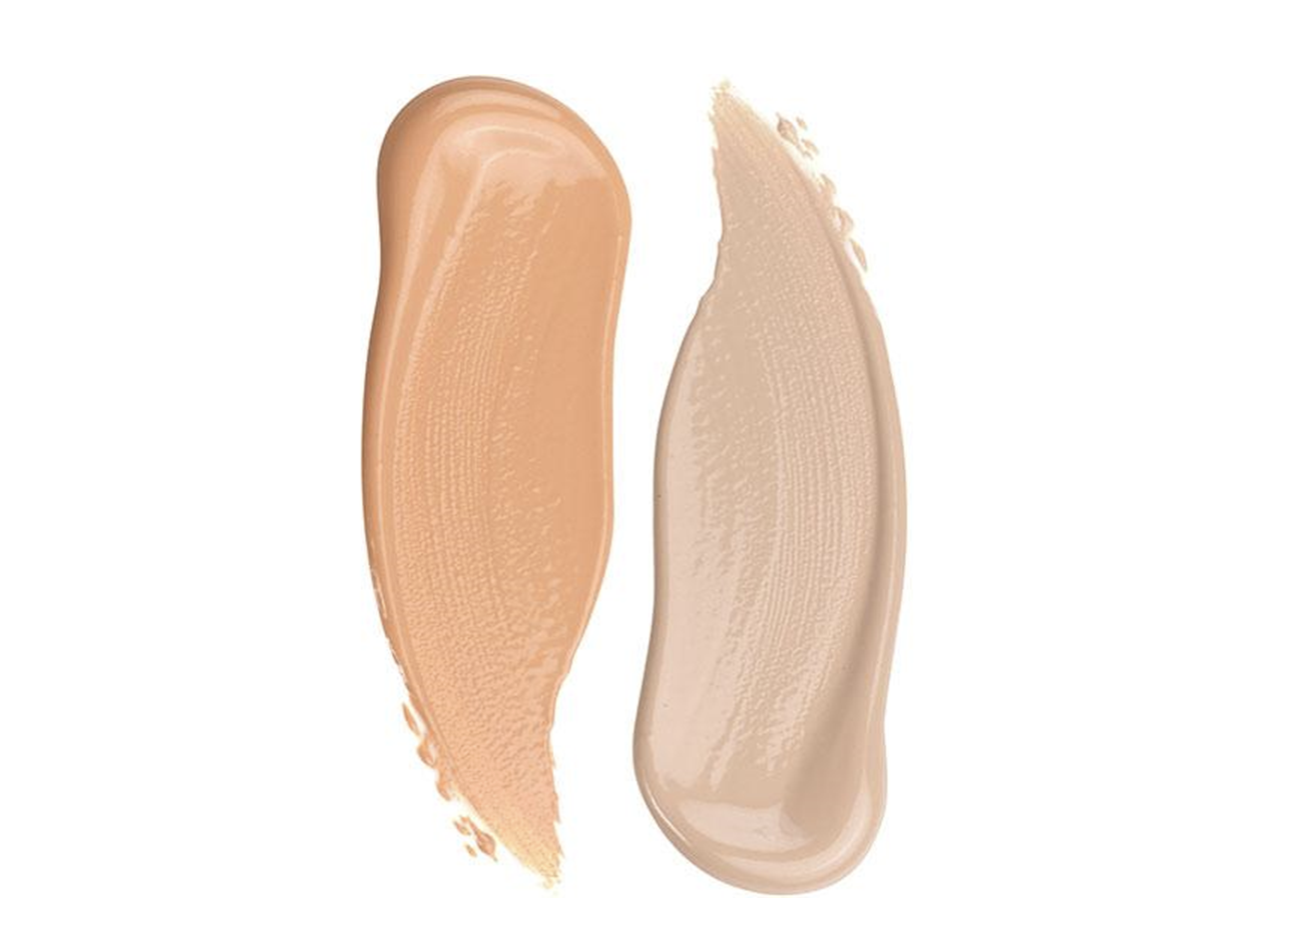 9 Tips On How To Choose The Right Foundation Shade